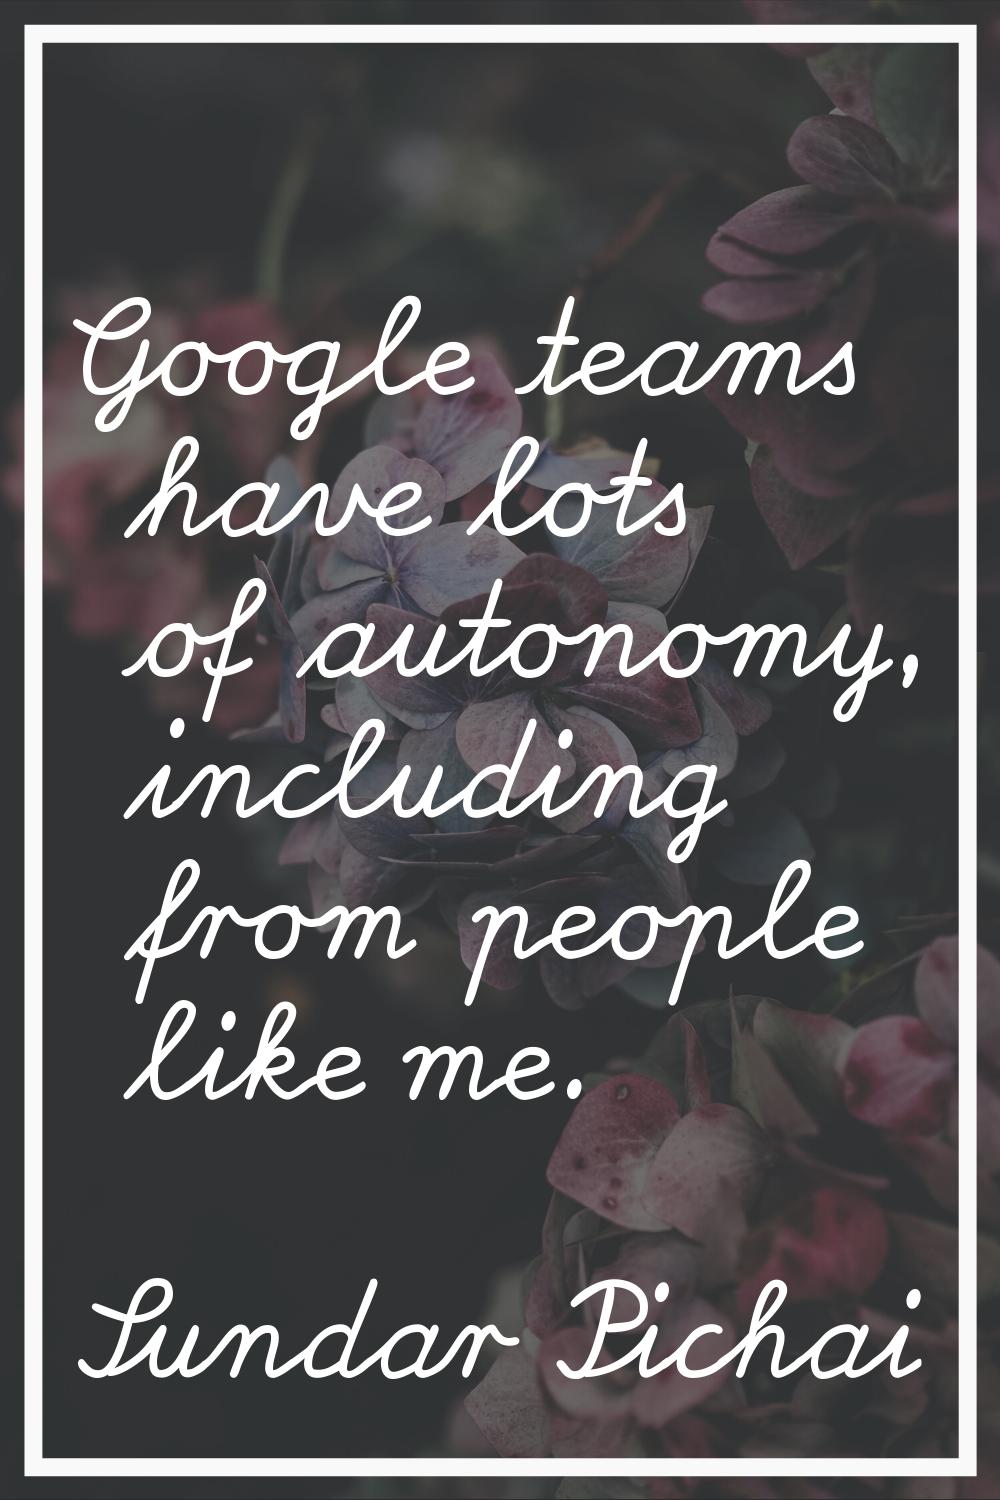 Google teams have lots of autonomy, including from people like me.